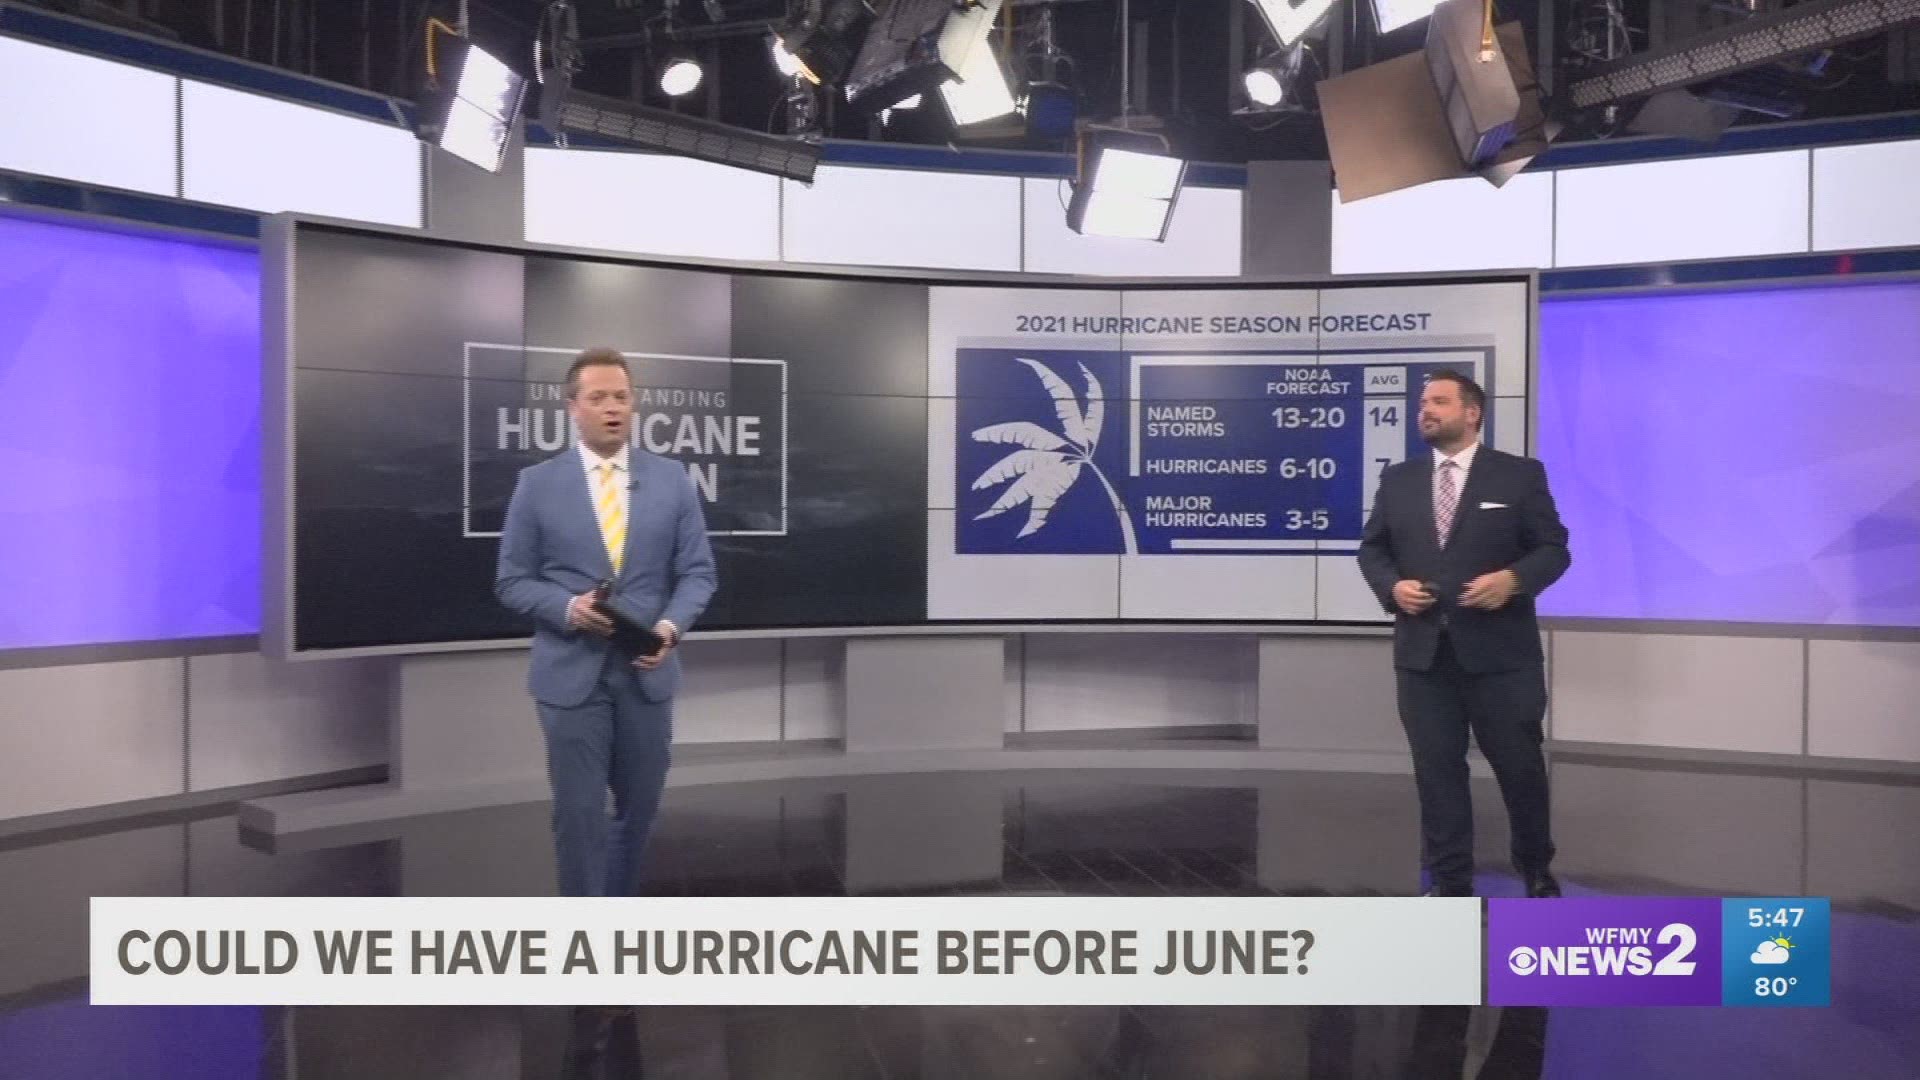 Hurricane season begins in June and it's never too early to plan ahead. We dig into the forecast and address why it seems our state gets hit the hardest.